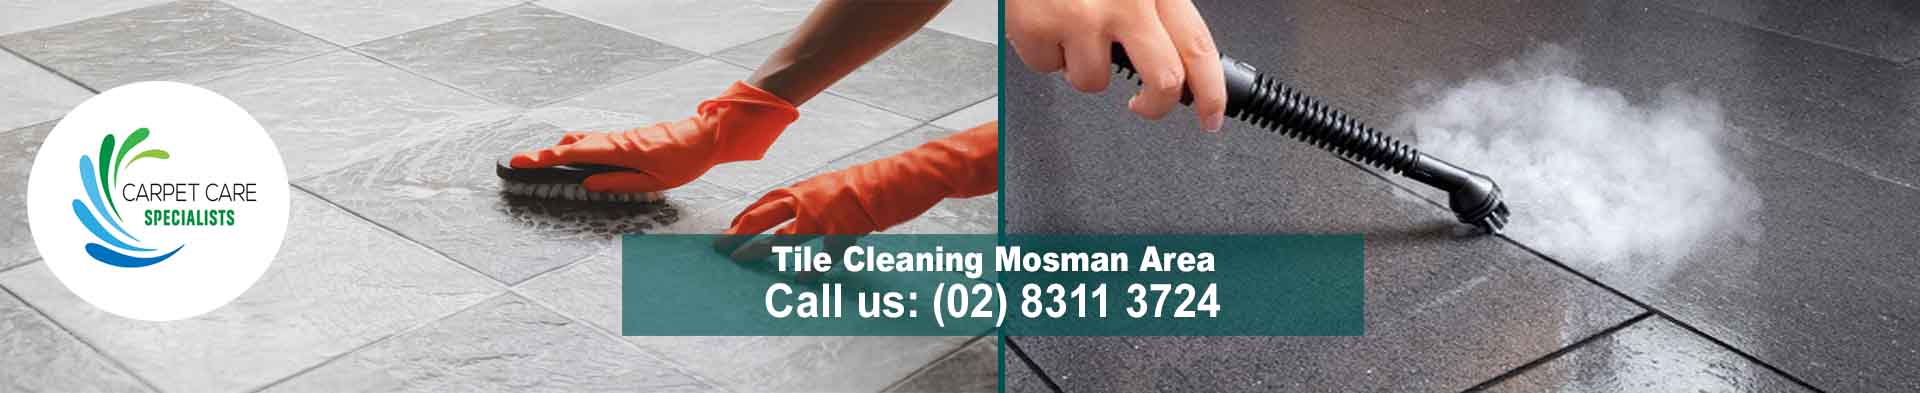 TIle Cleaning Mosman Area